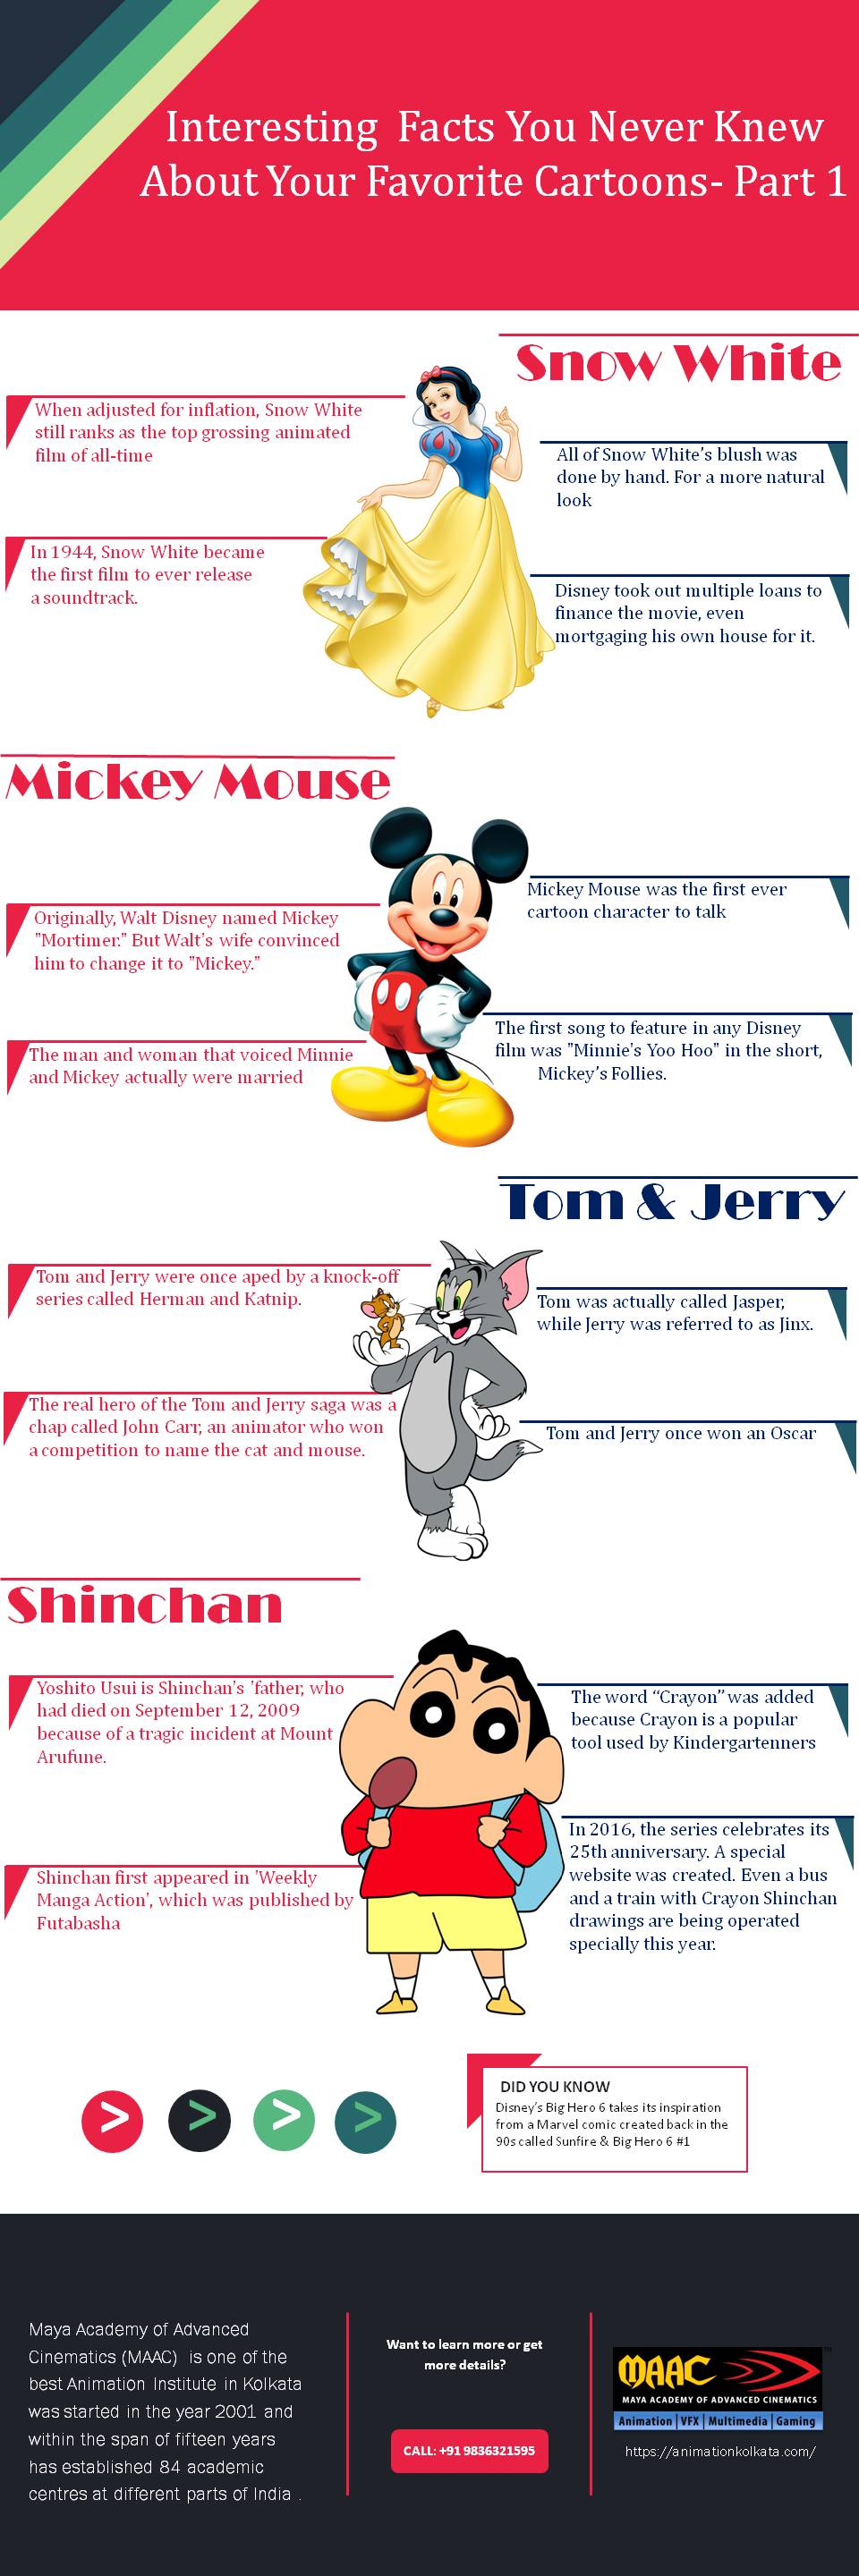 interesting-facts-you-never-knew-about-your-favorite-cartoons-part-1